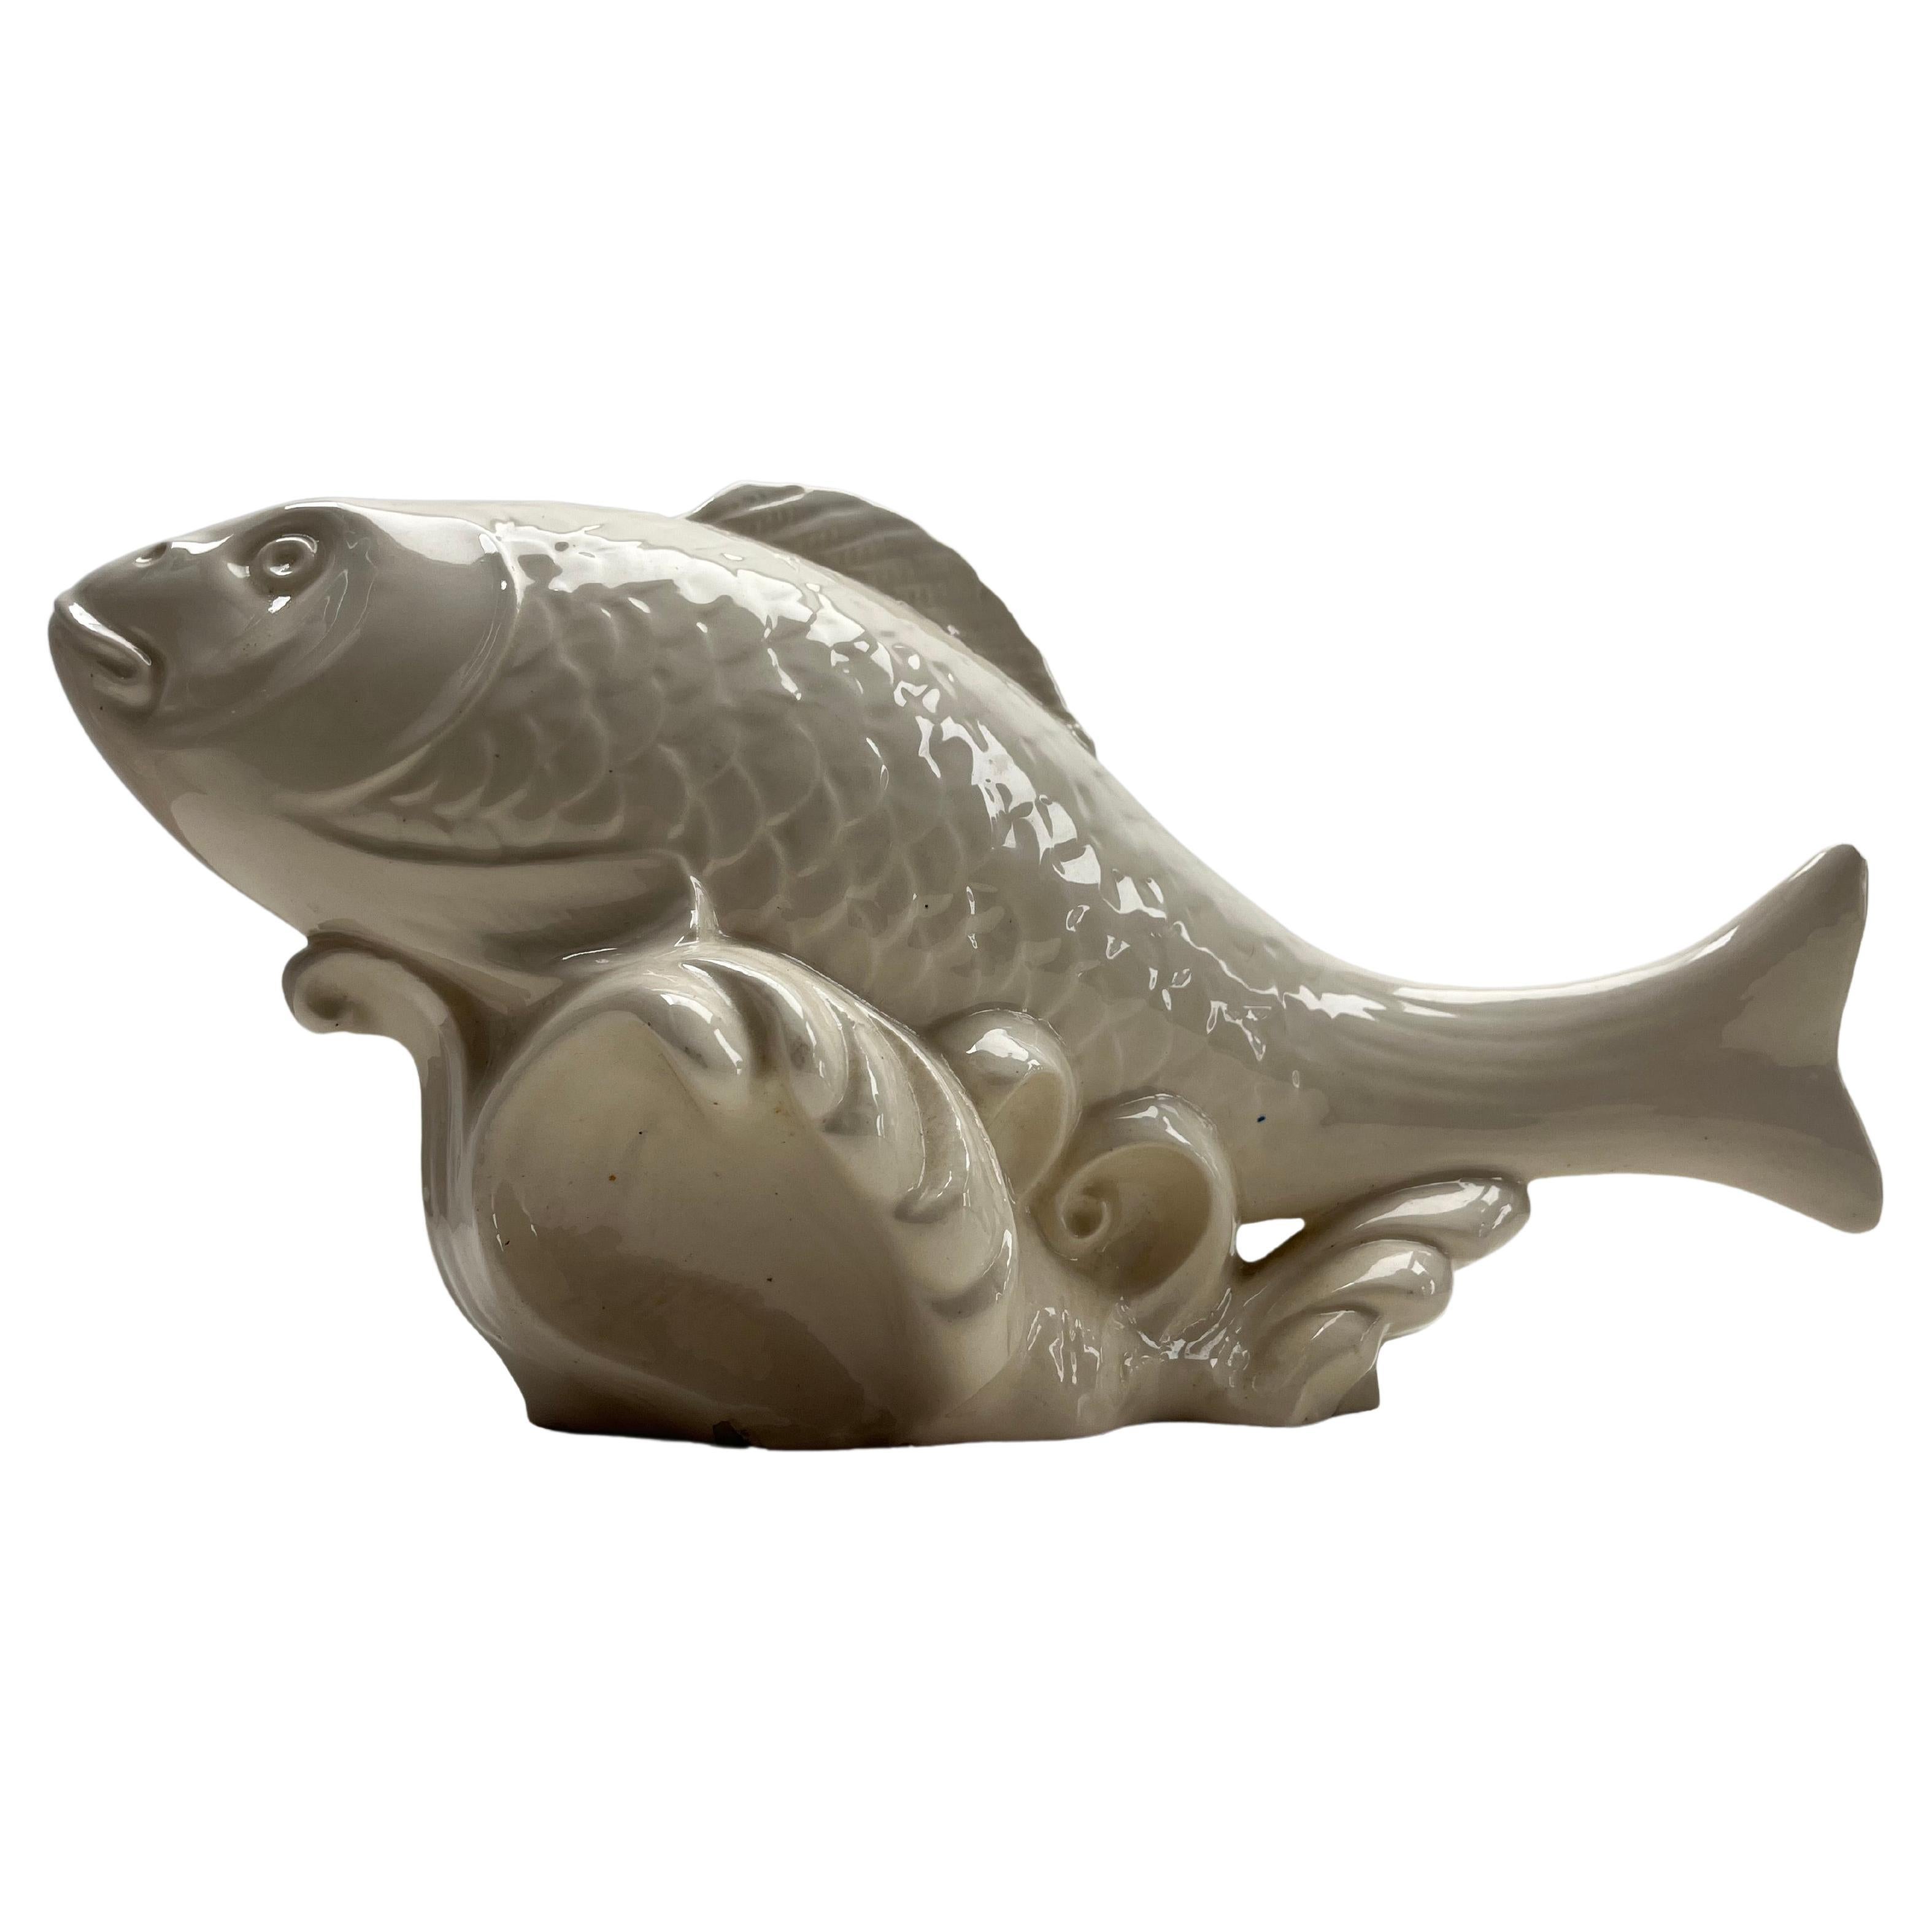 Stylish Ceramic Glazed Fish Sculpture, Italy, Late 1950s For Sale 1